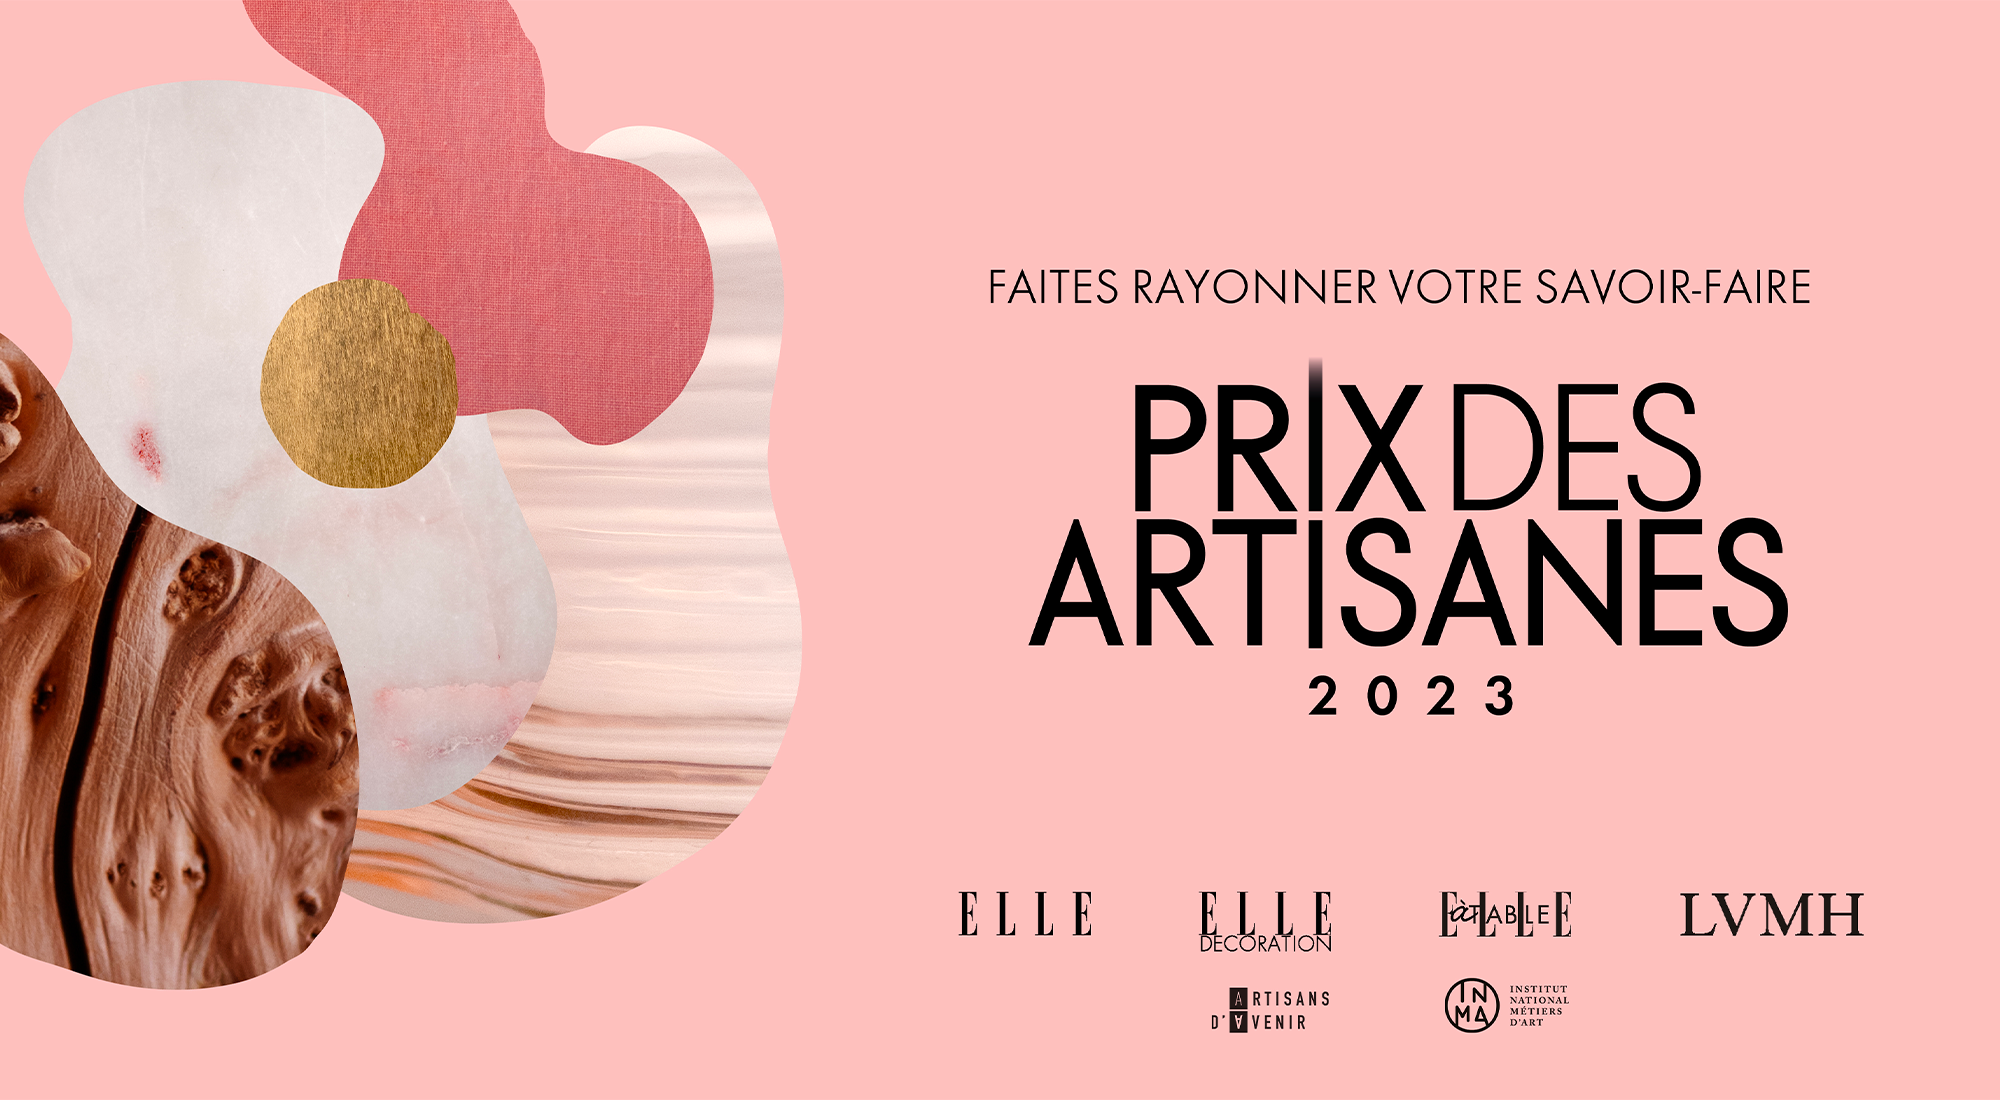 ELLE and LVMH announce the four winners of Prix des Artisanes 2nd